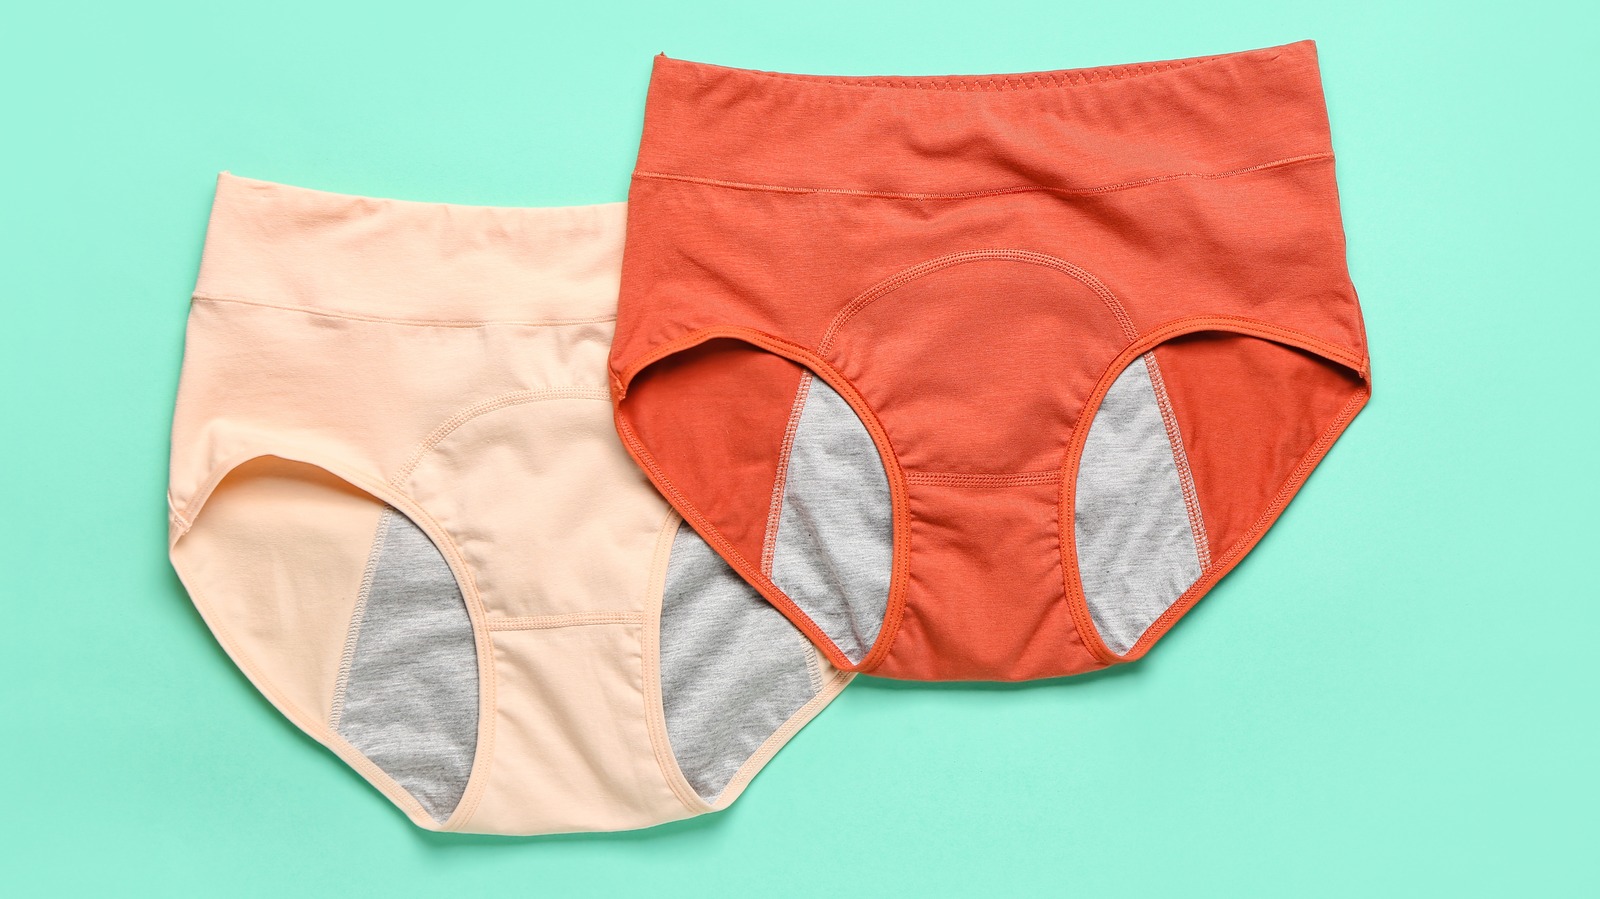 The Right Way To Wash Your Period Underwear